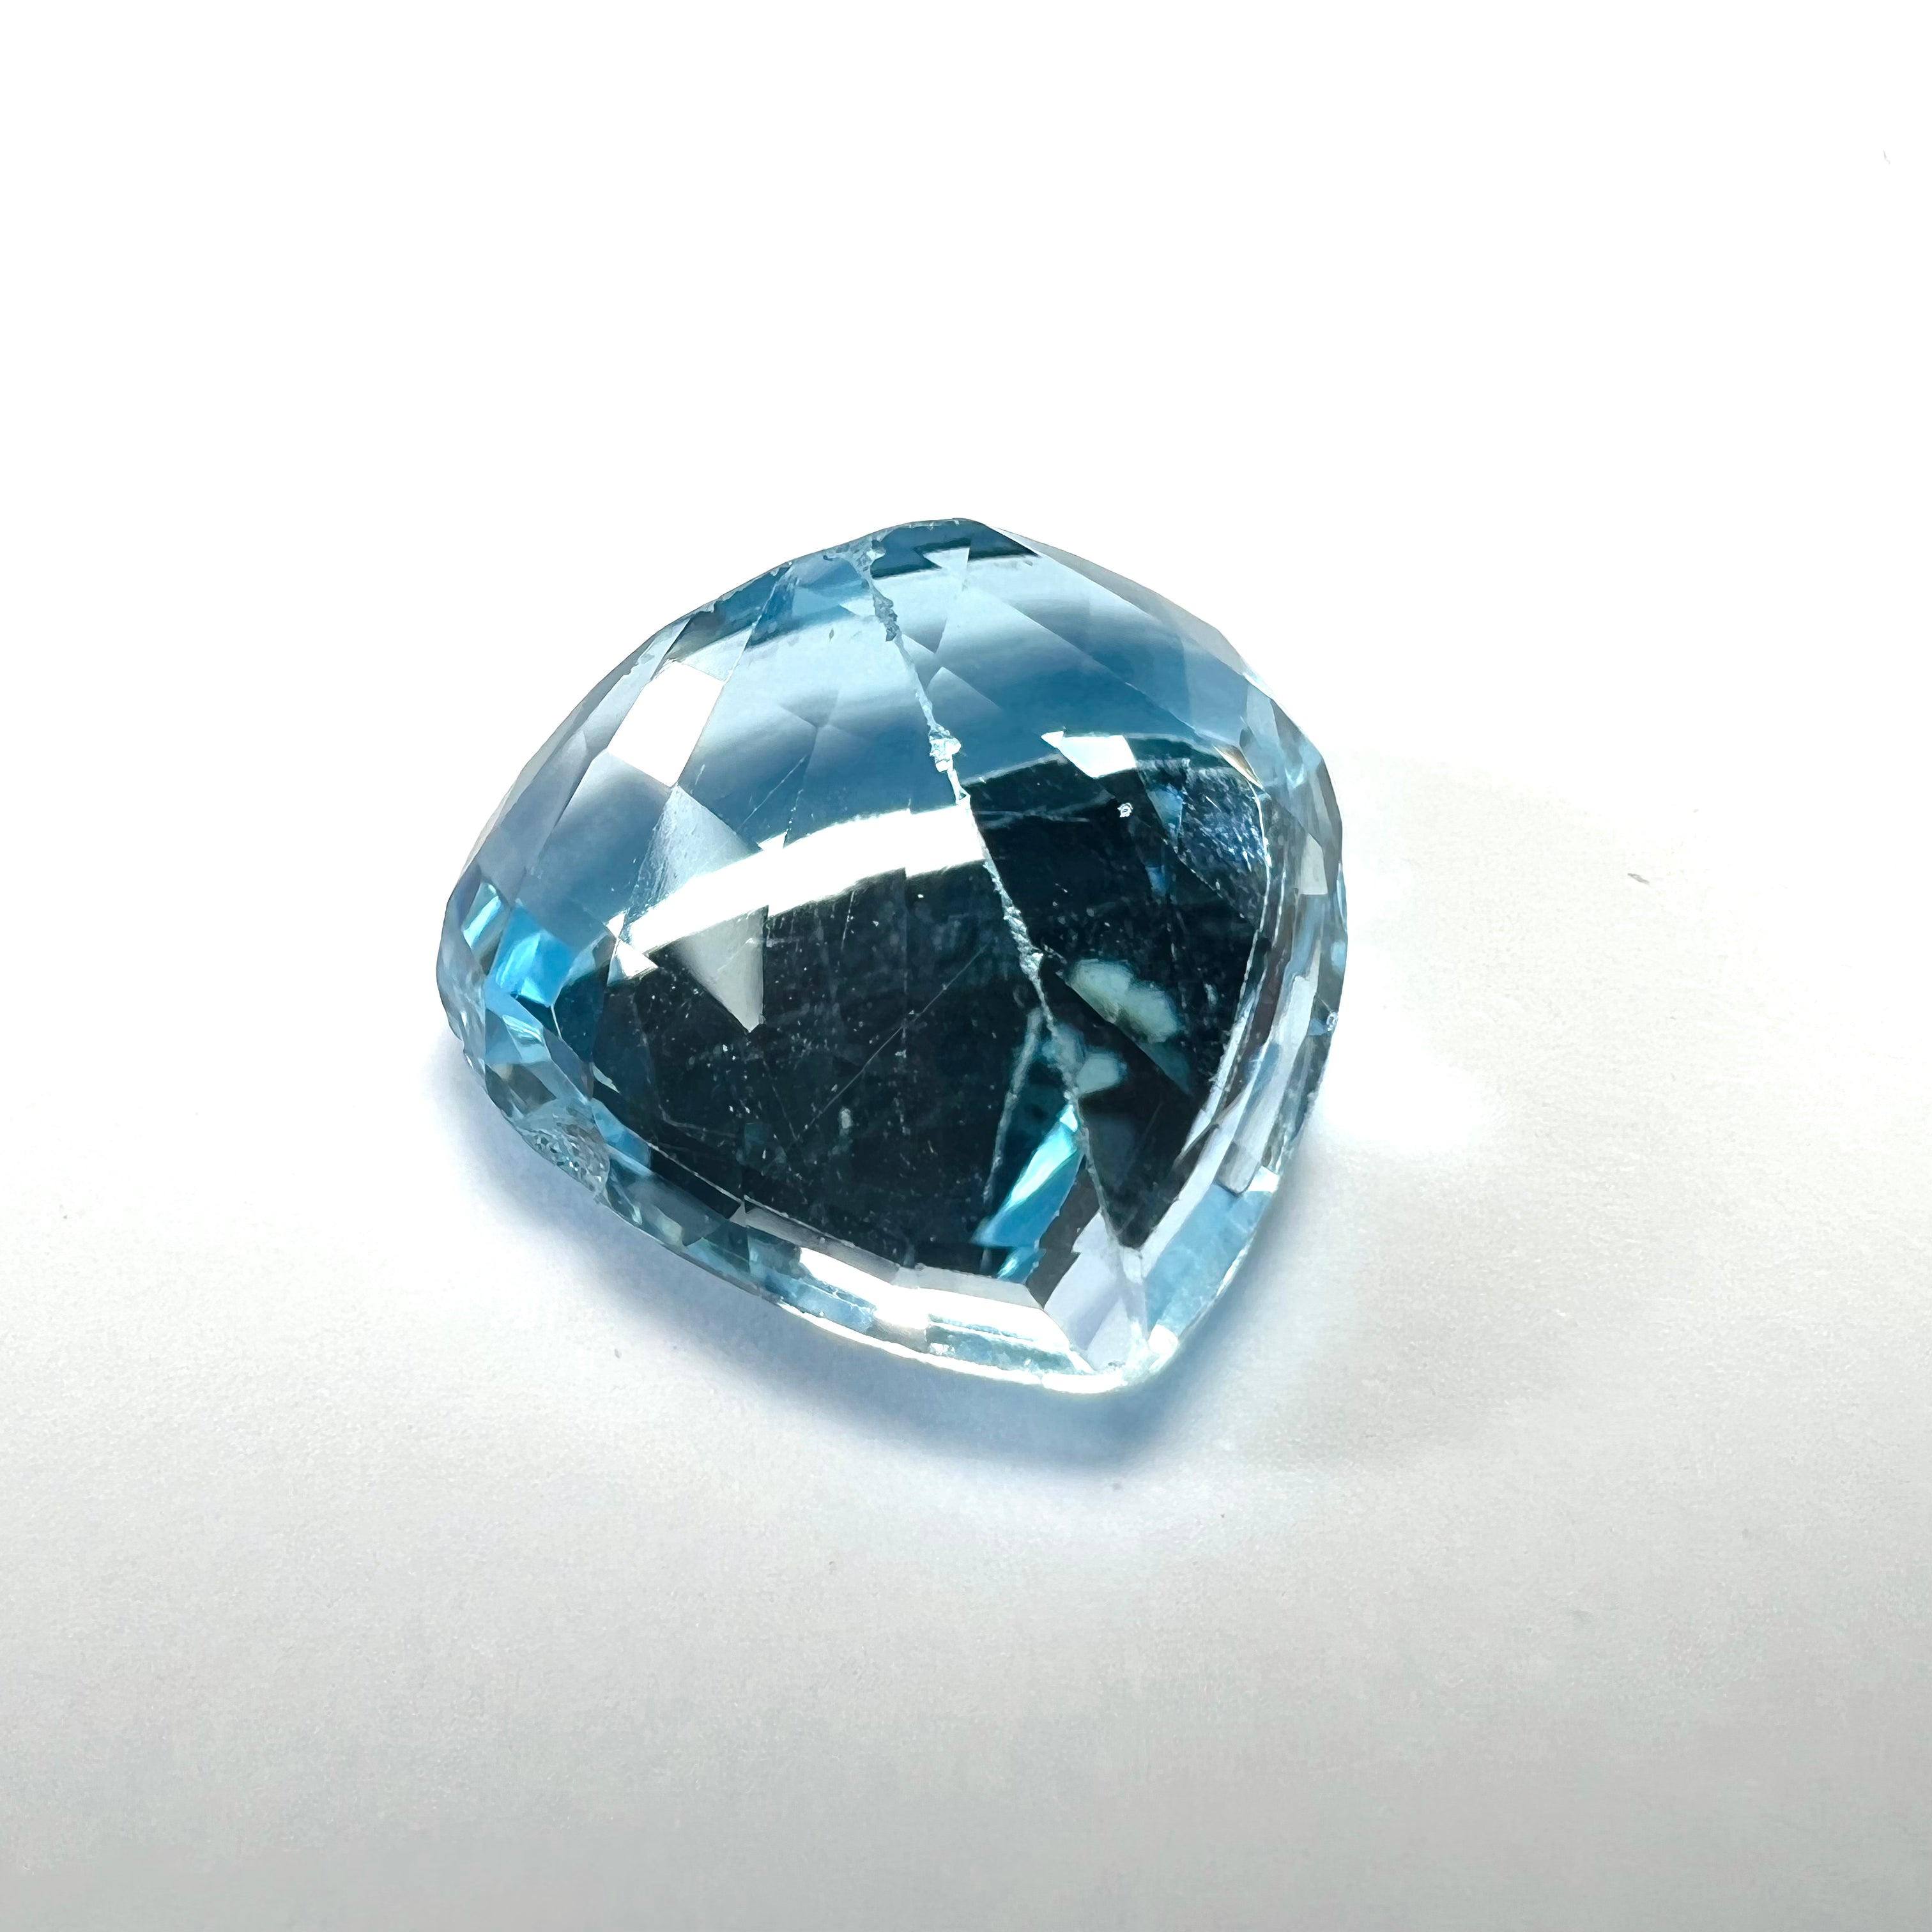 14.75CTW Loose Natural Trillion Cut Topaz 15.5x9.1mm Earth mined Gemstone